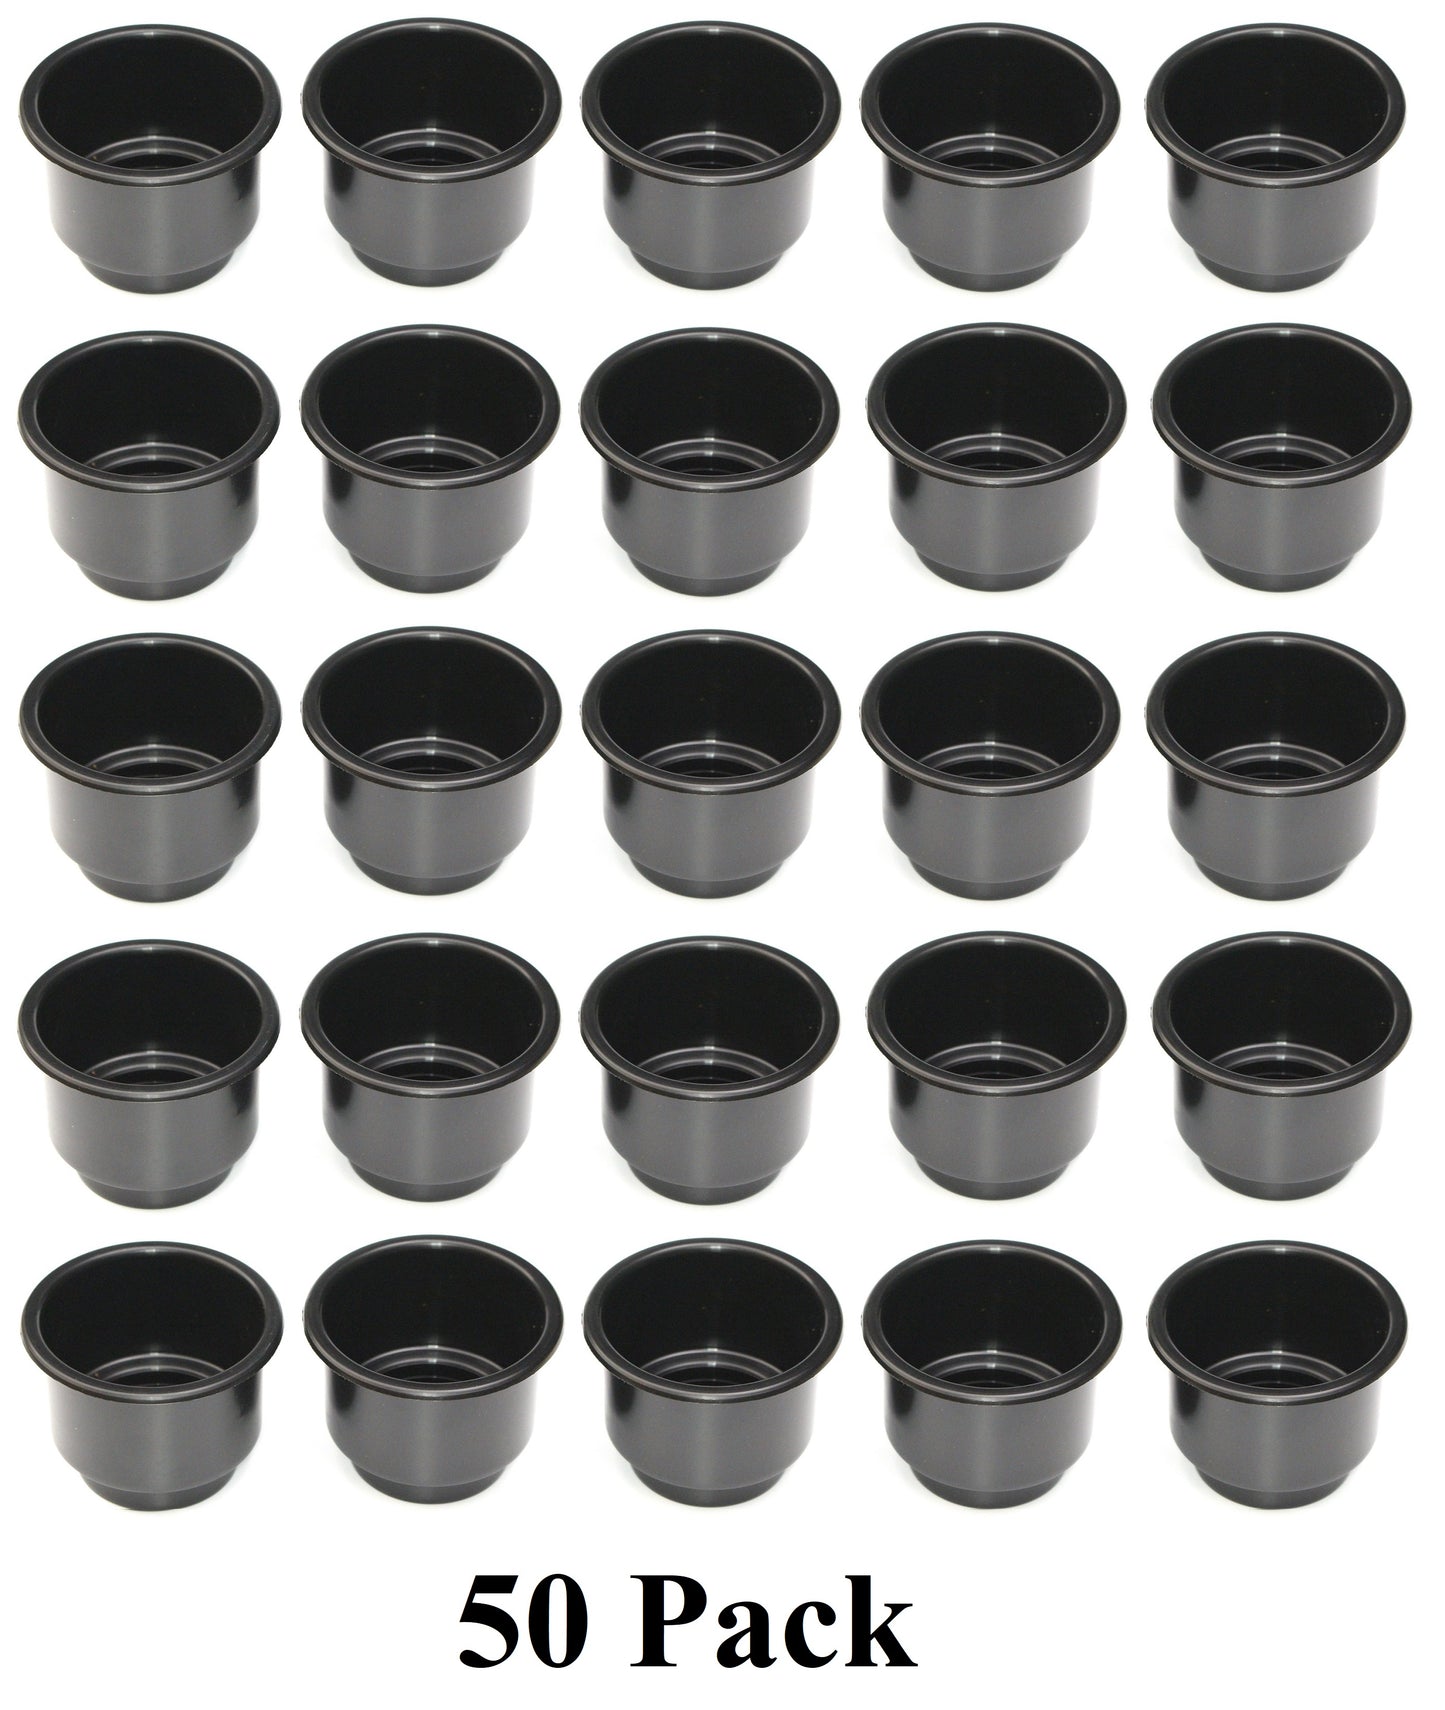 3-5/8" Black Jumbo Cup Holder Recessed Drop-in Inserts for Boat RV Car Truck Sofa